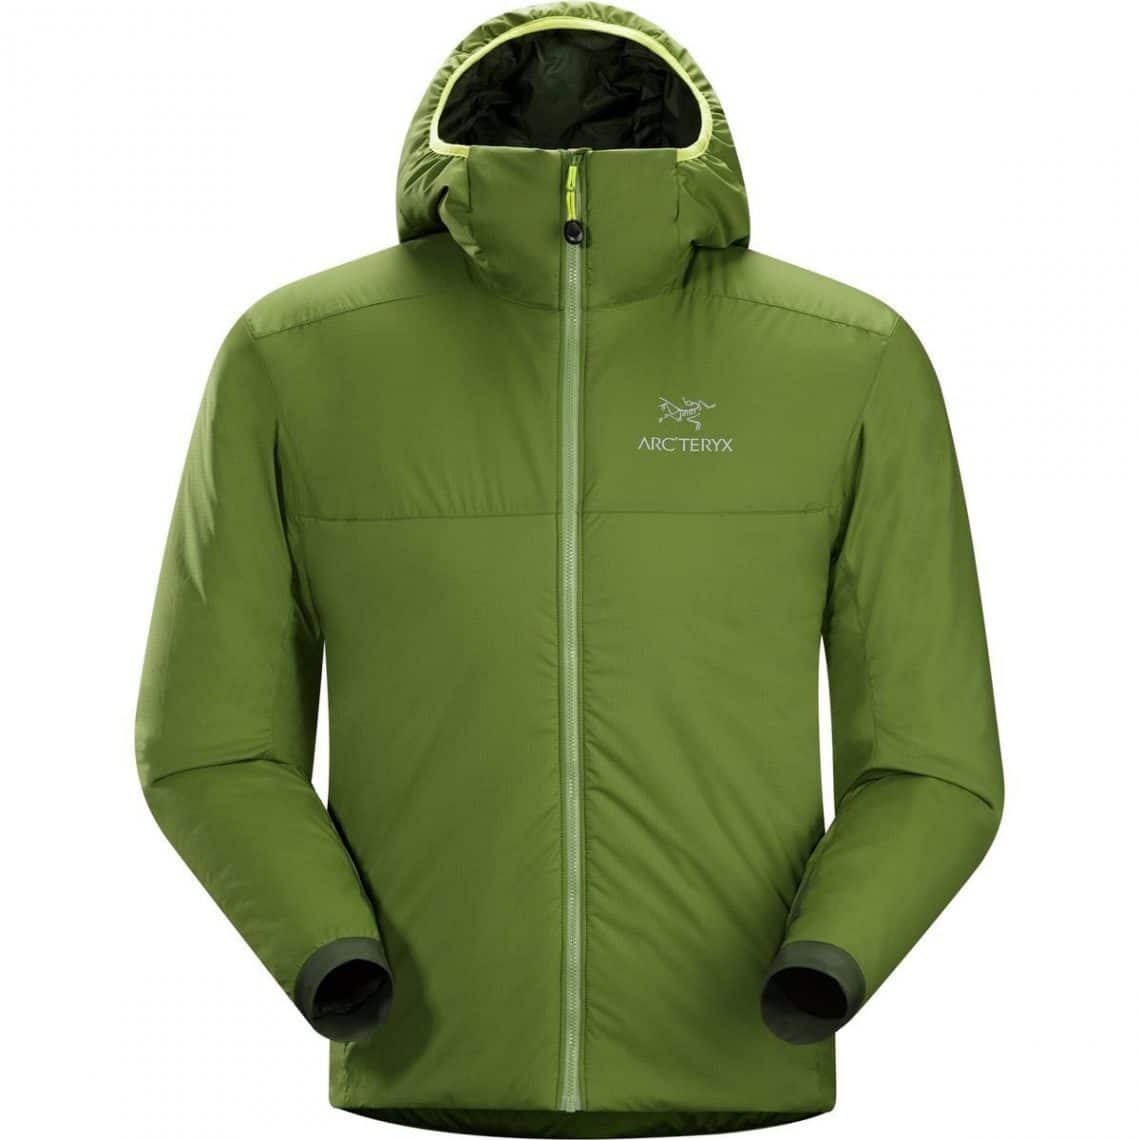 Best Insulated Jacket: Top Products and Buying Guide